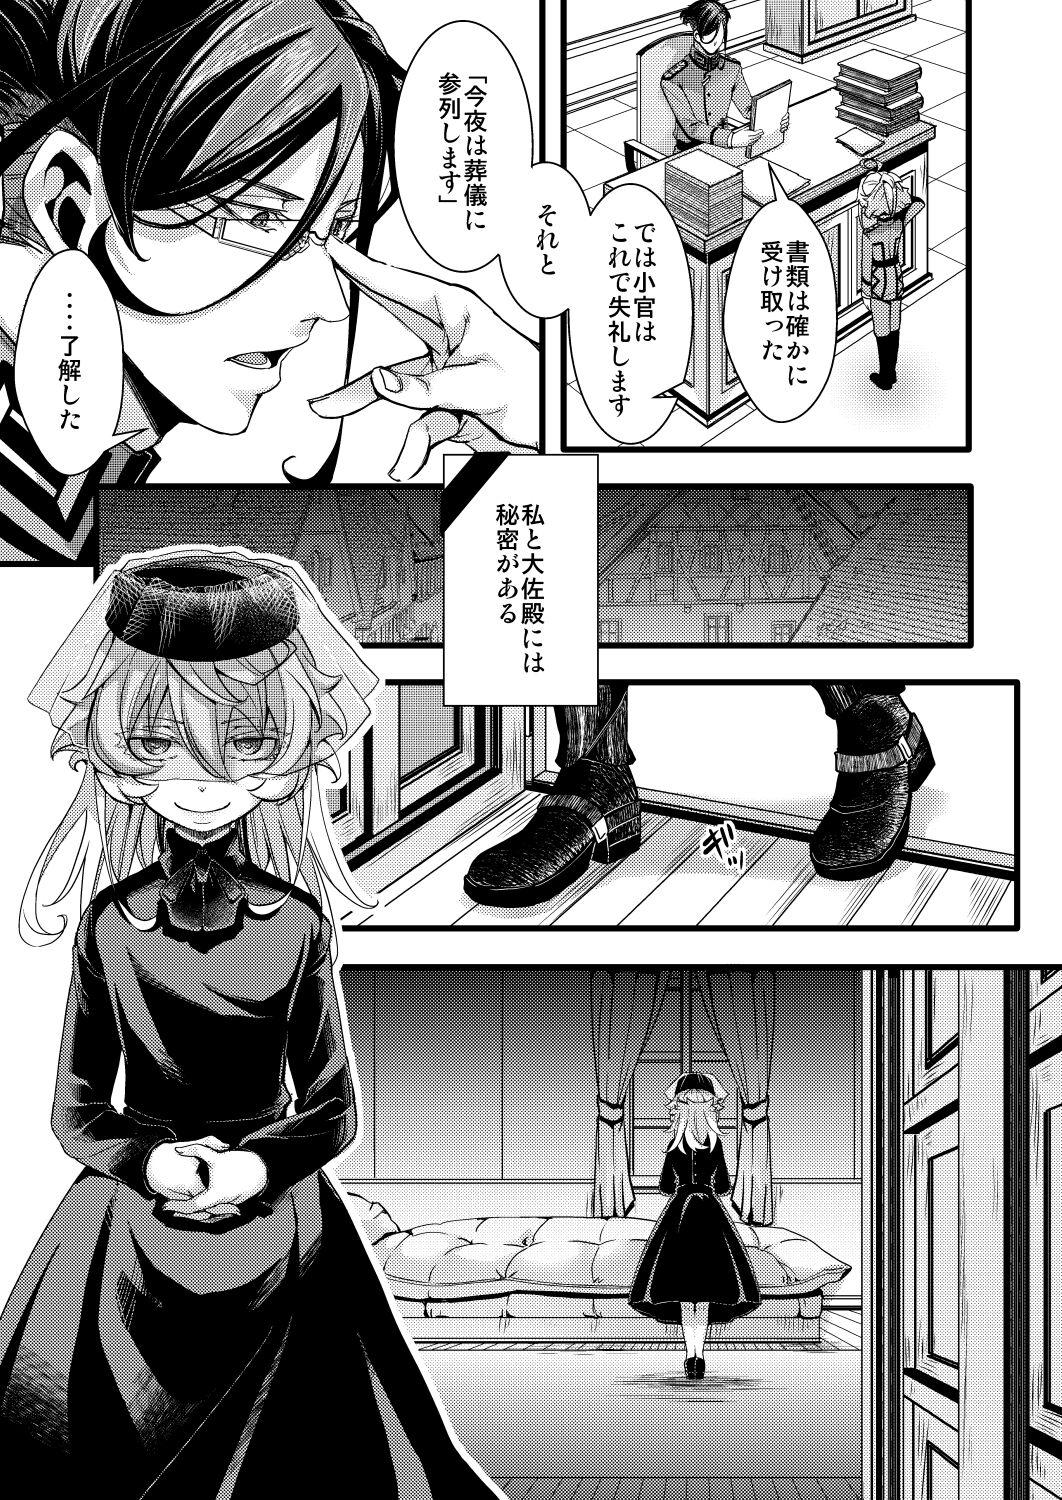 Glamour Rugs - Youjo senki | saga of tanya the evil 18yearsold - Picture 1